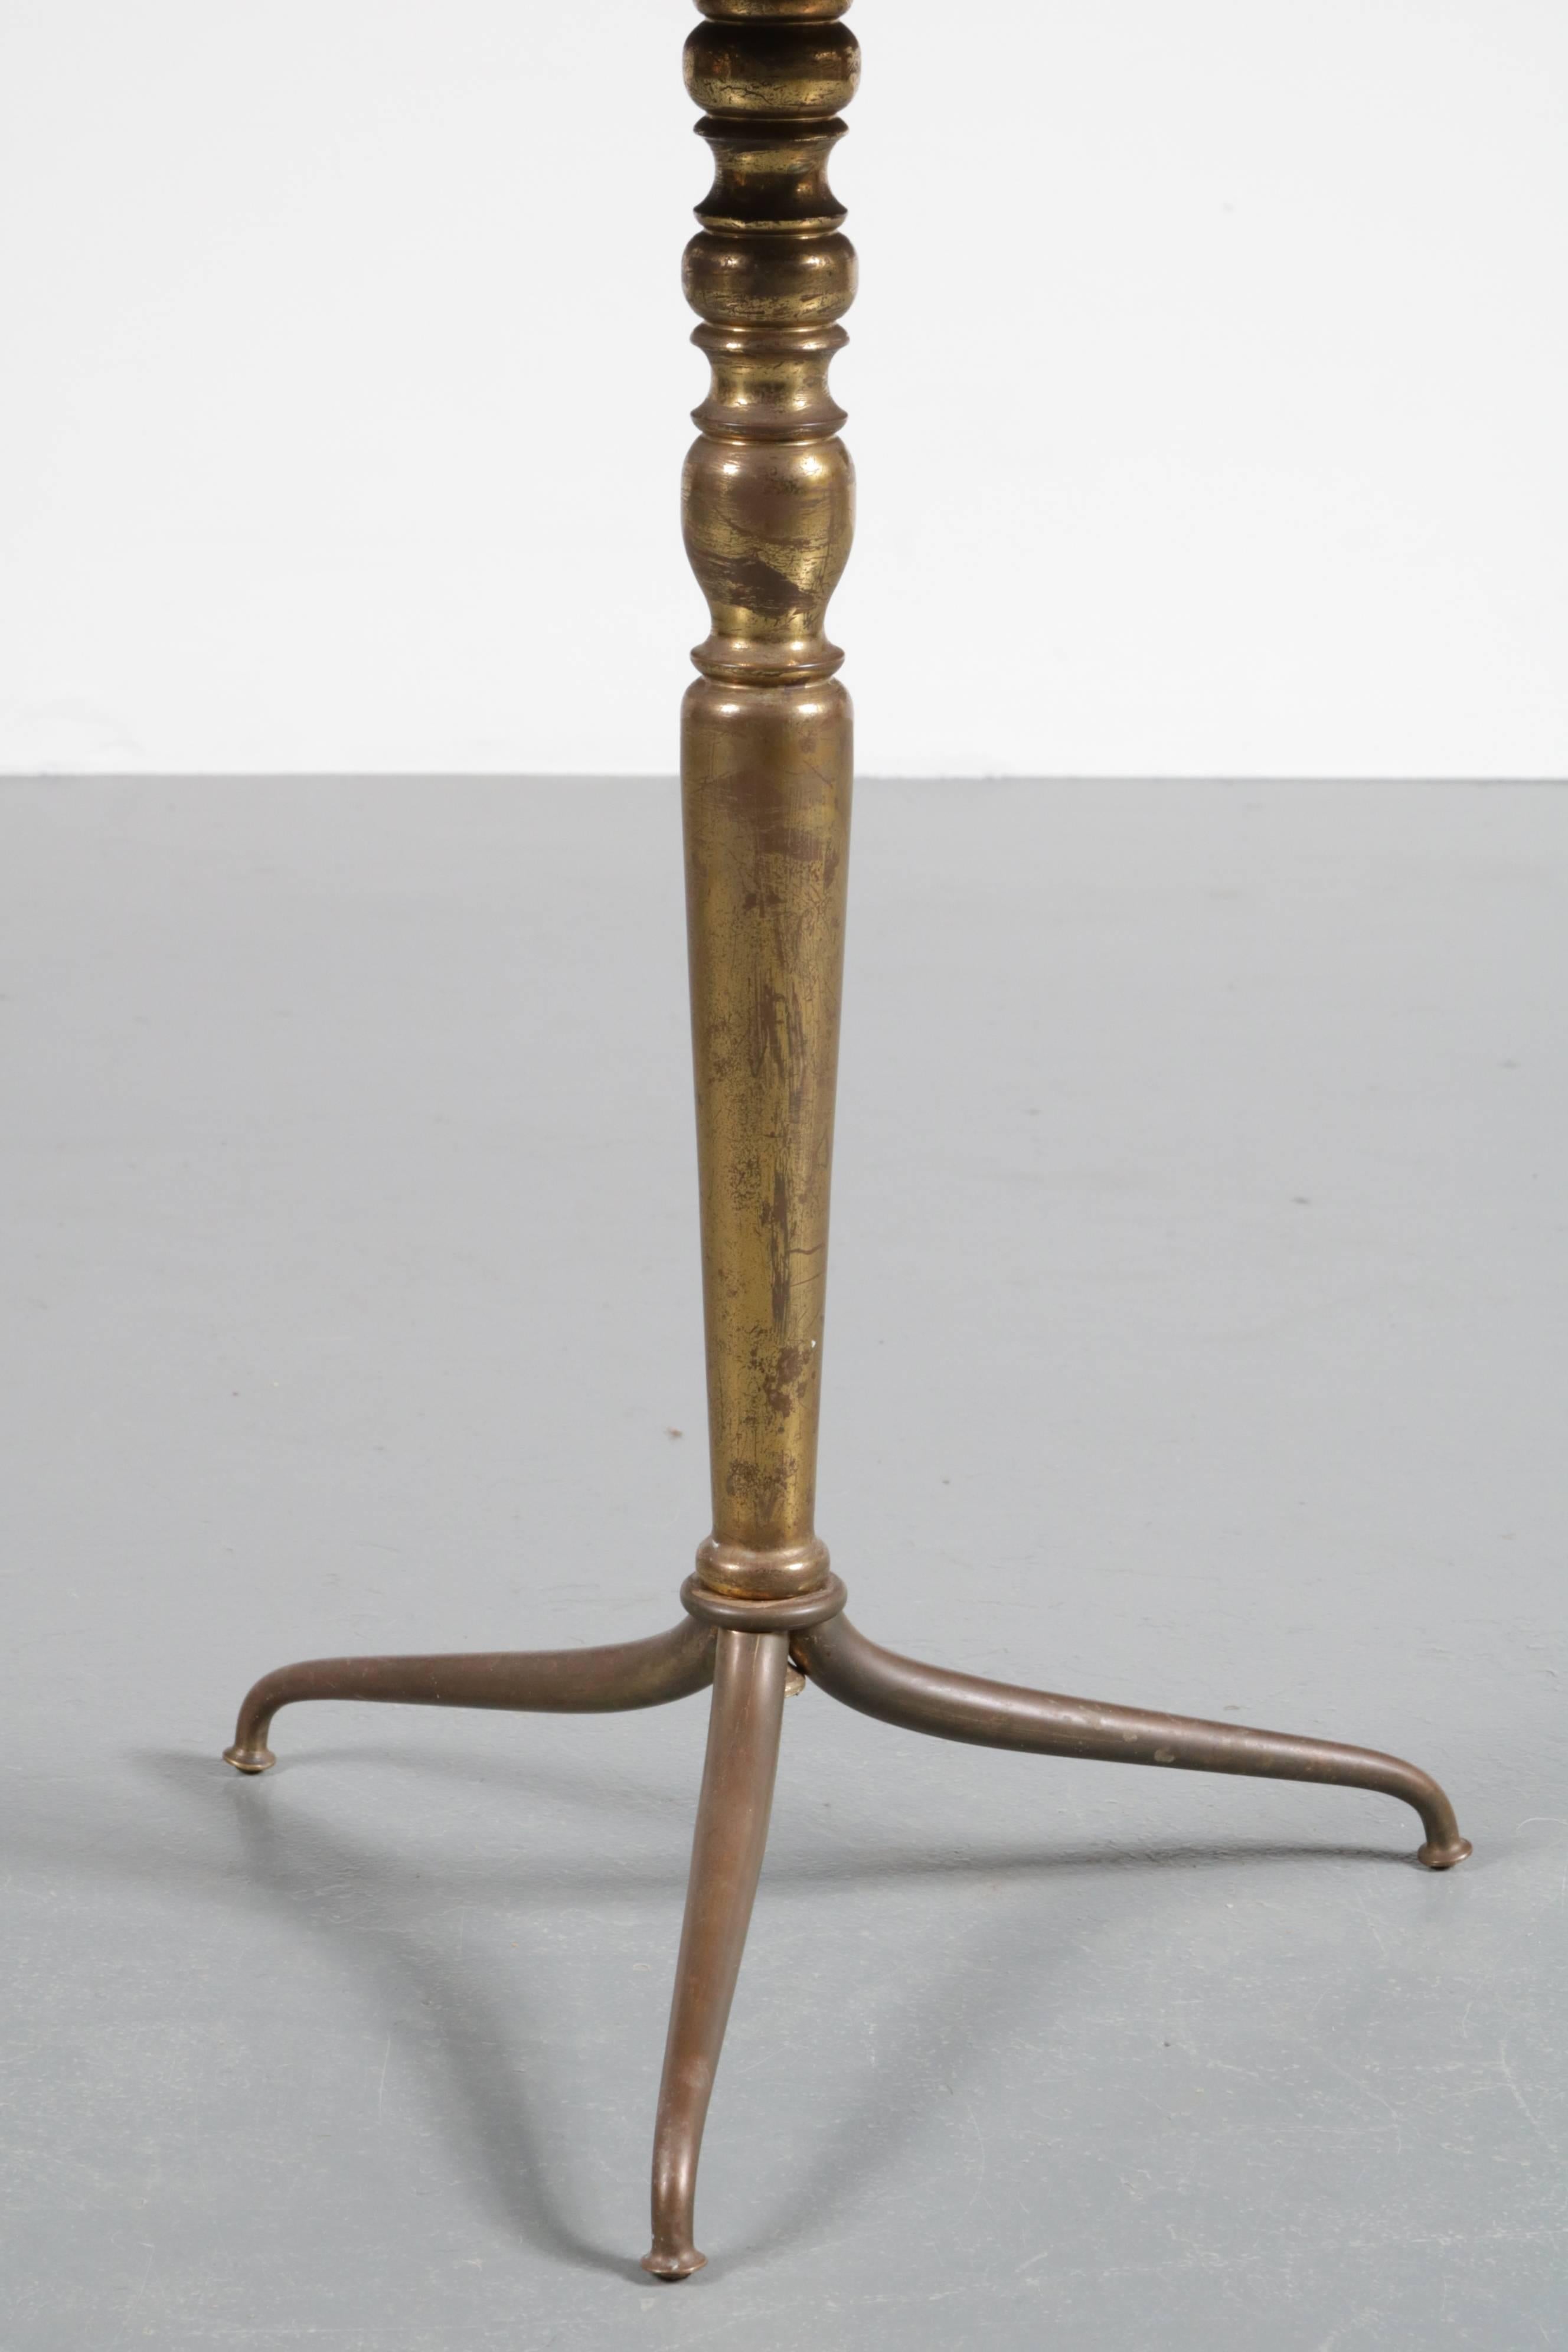 Brass Hand-Painted Side Table by Thanhley, Vietnam, circa 1940